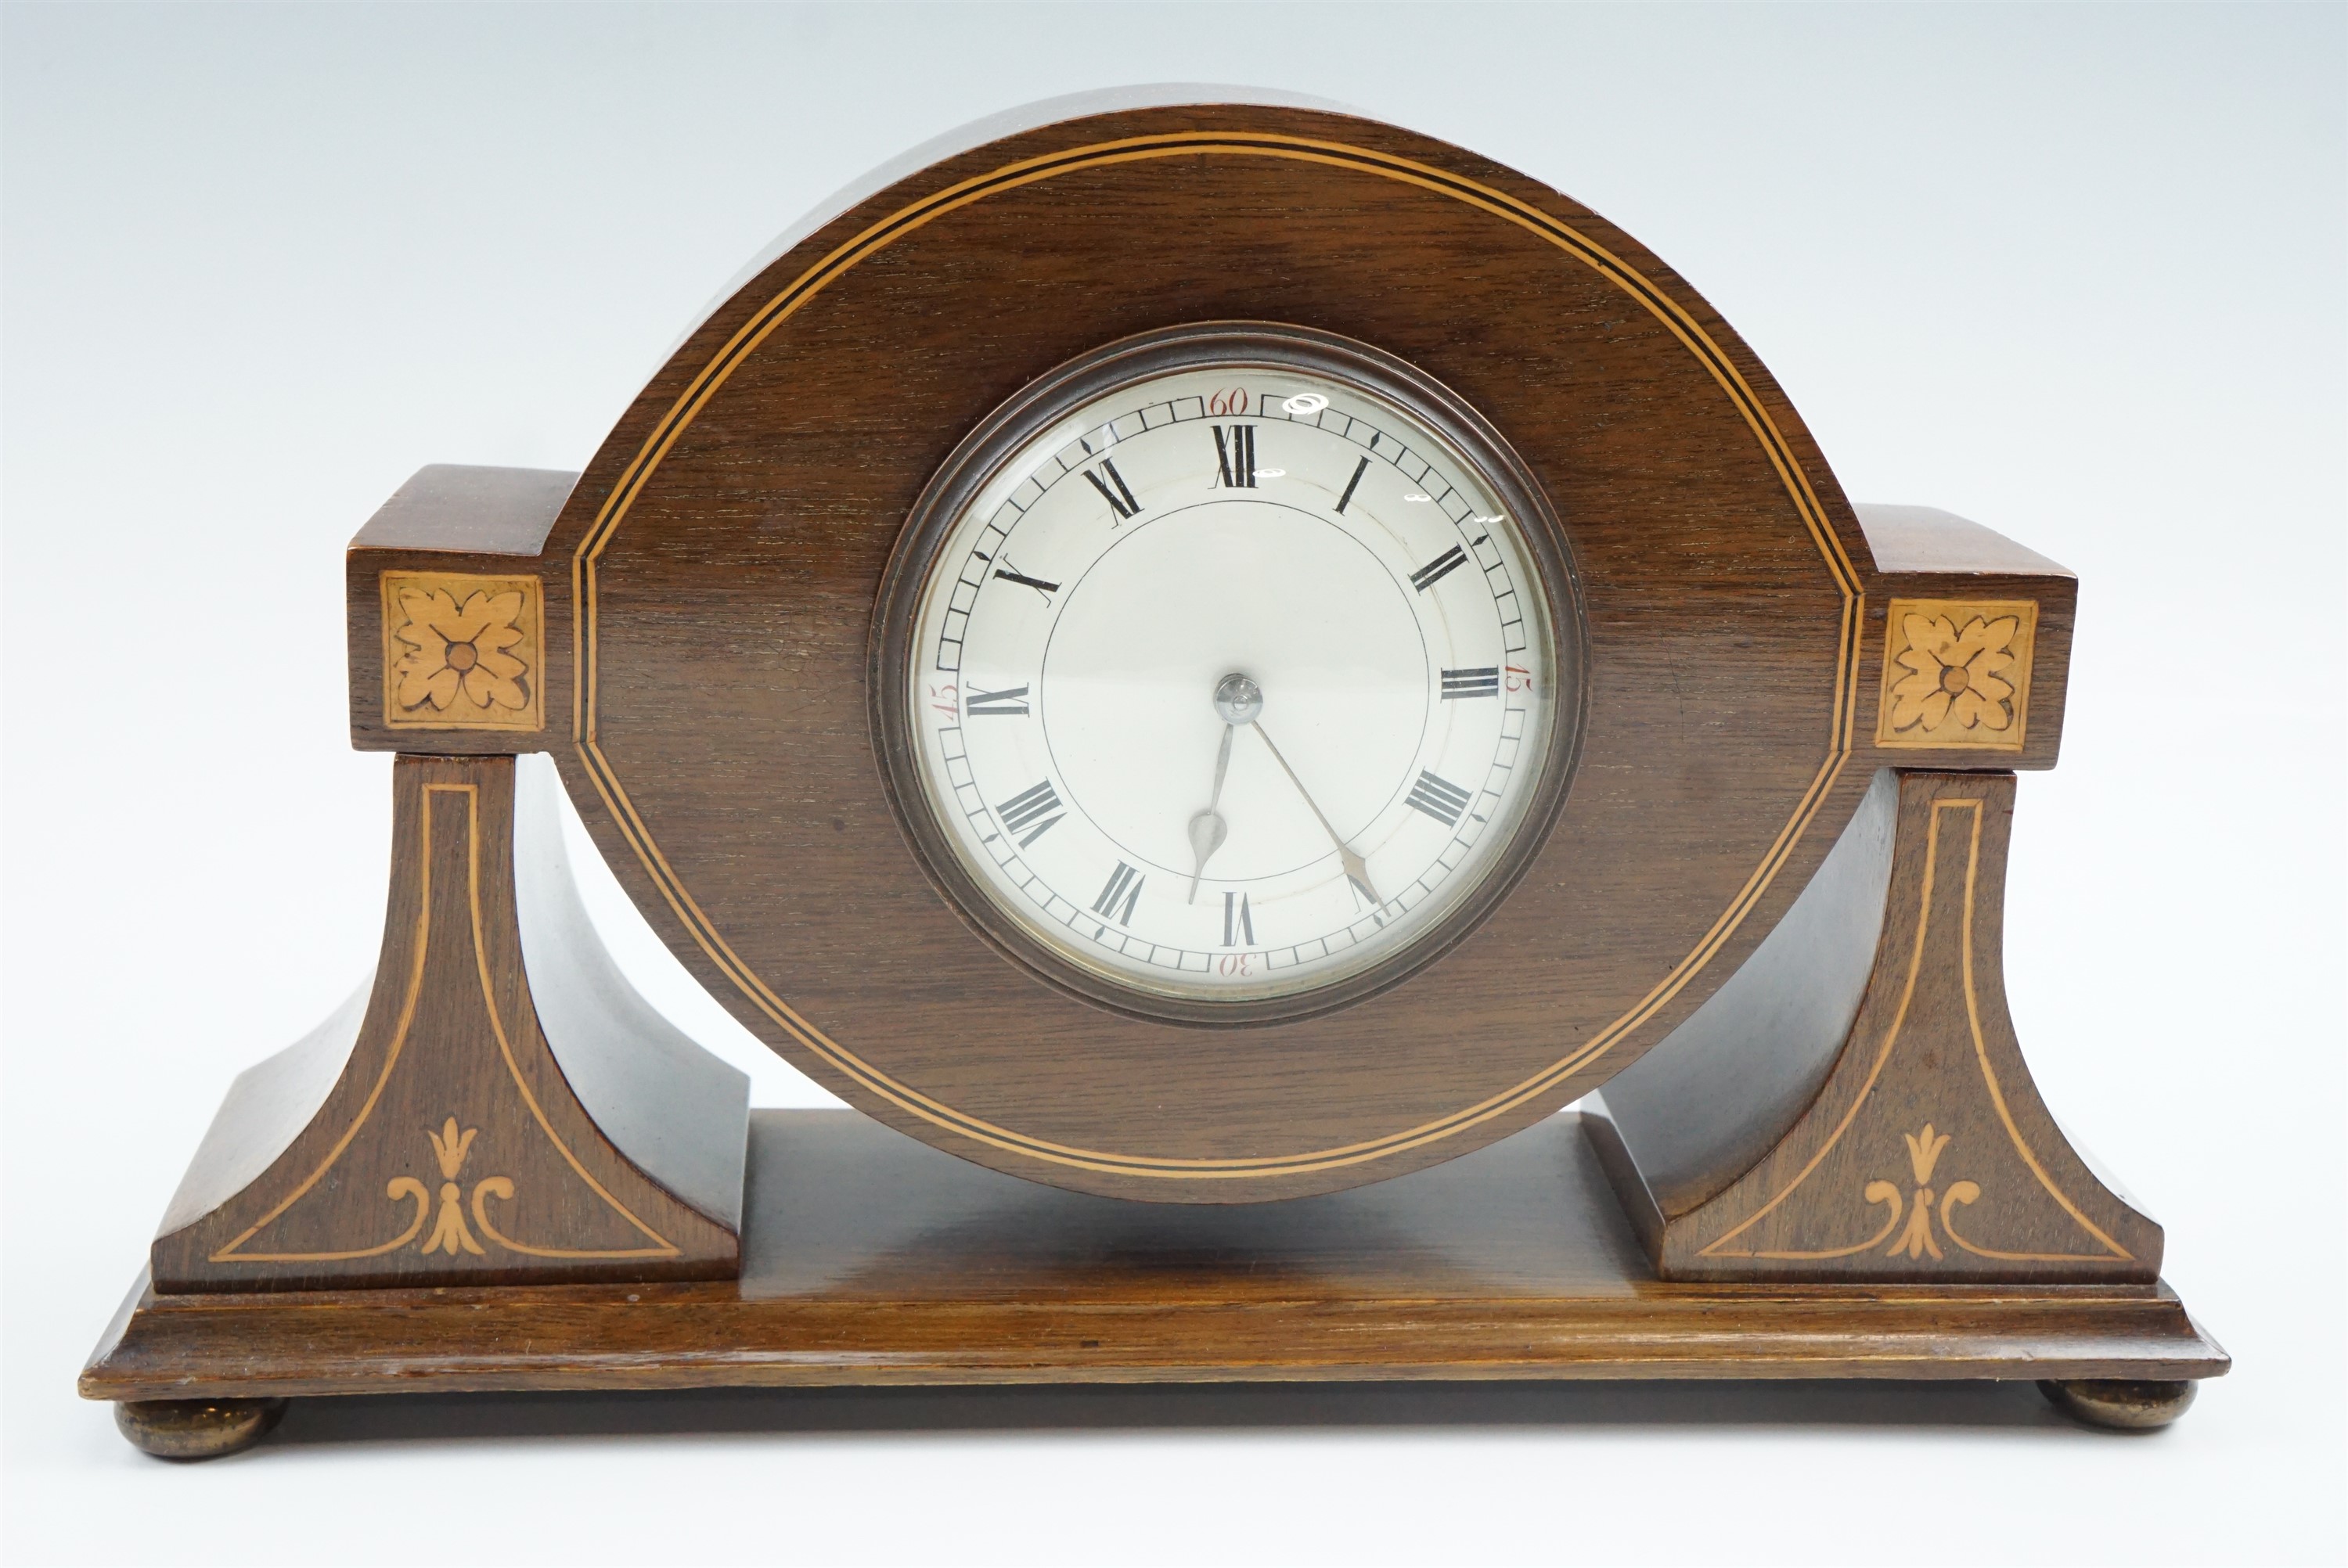 An Edwardian marquetry and string-inlaid mahogany mantle clock, having a French spring-driven